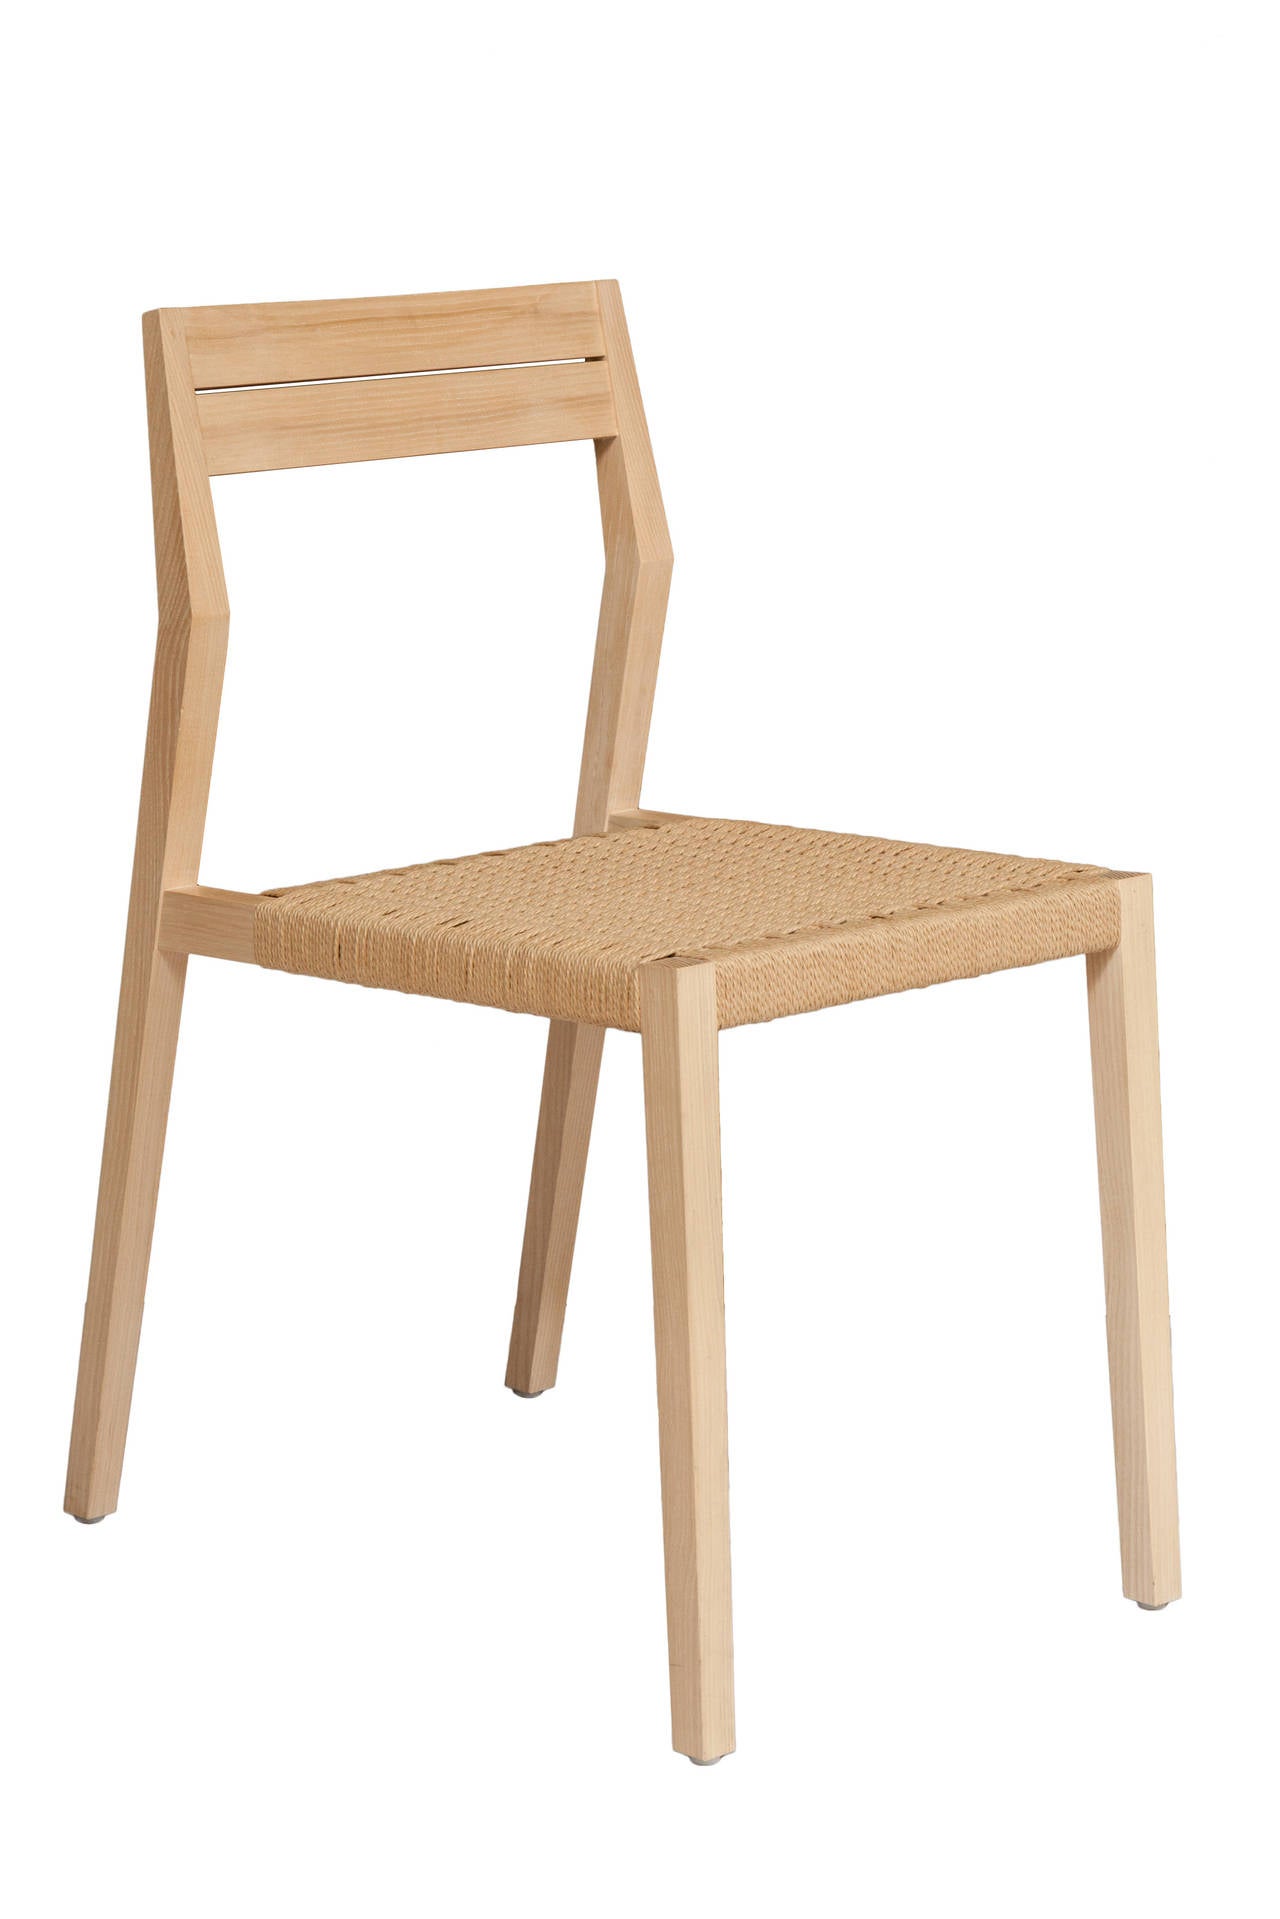 STILLMADE Solid White Oak Dining Chair with Paper Cord Seat For Sale at